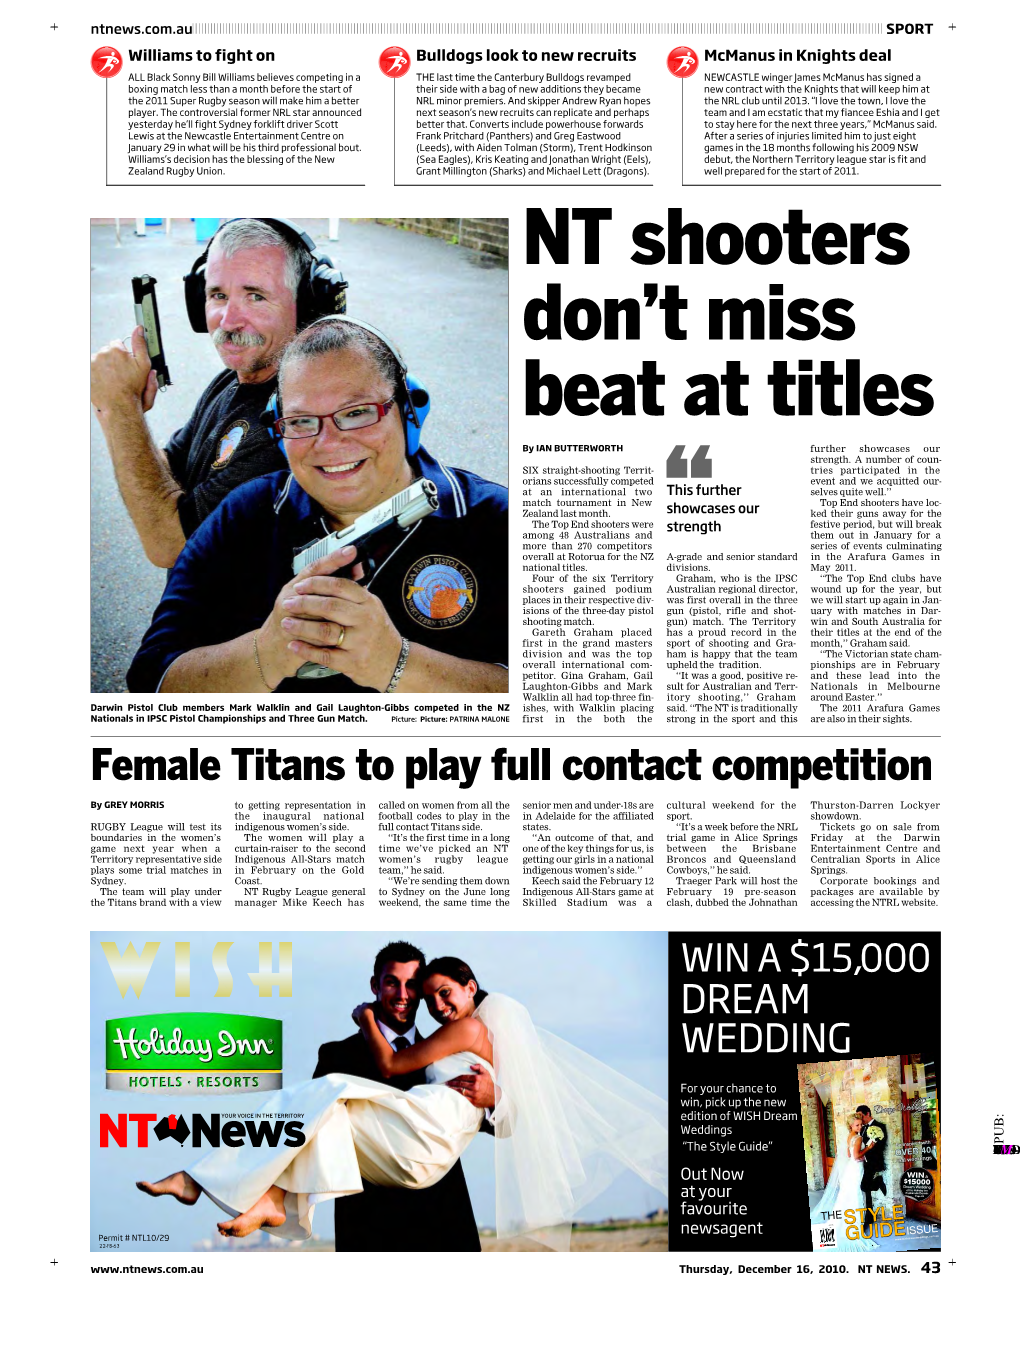 NT Shooters Don't Miss Beat at Titles